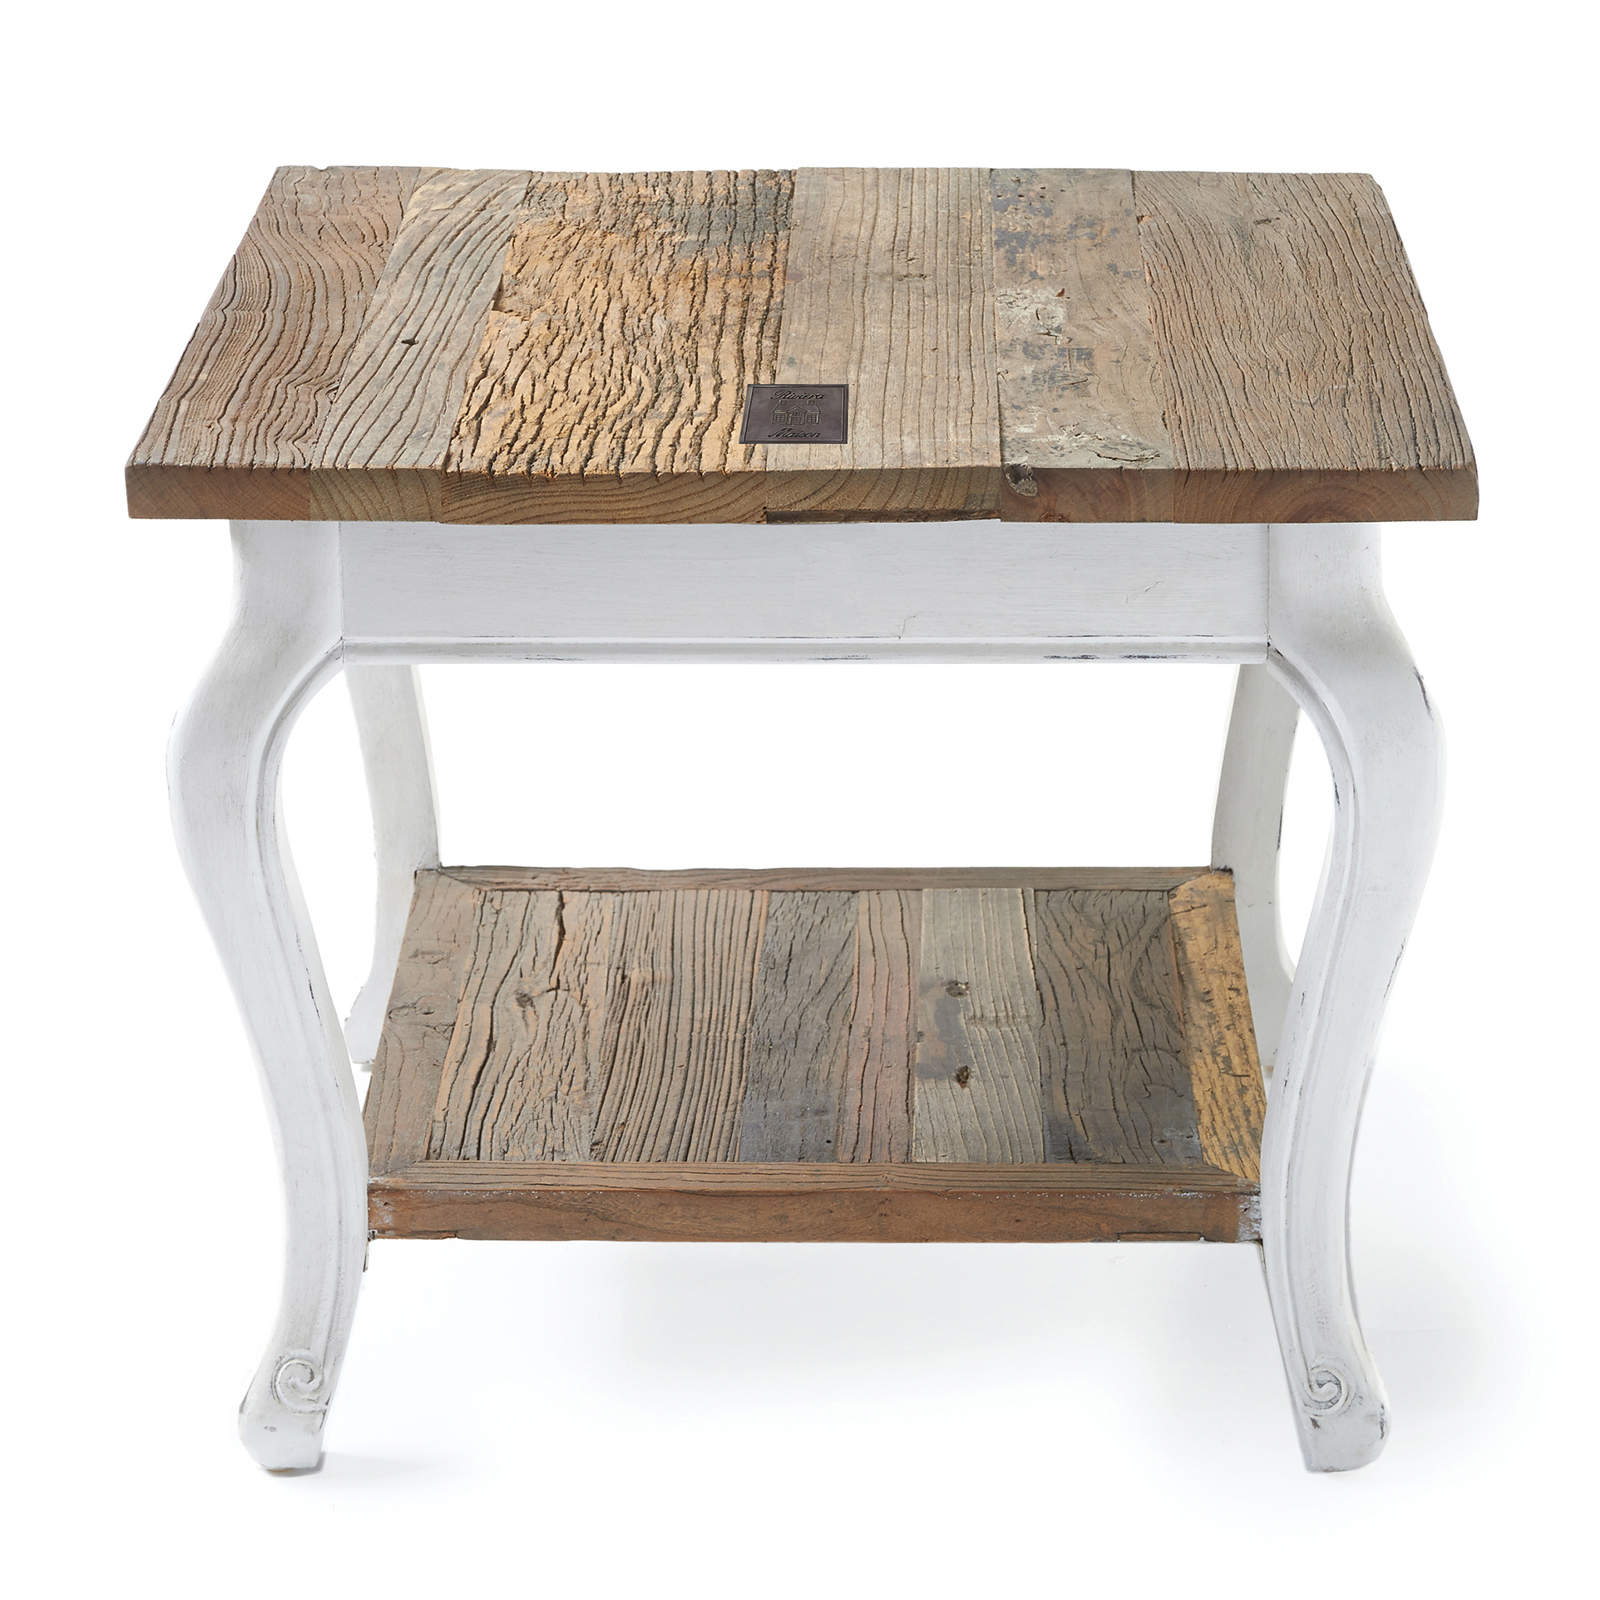 Driftwood End Table, 60x60 cm